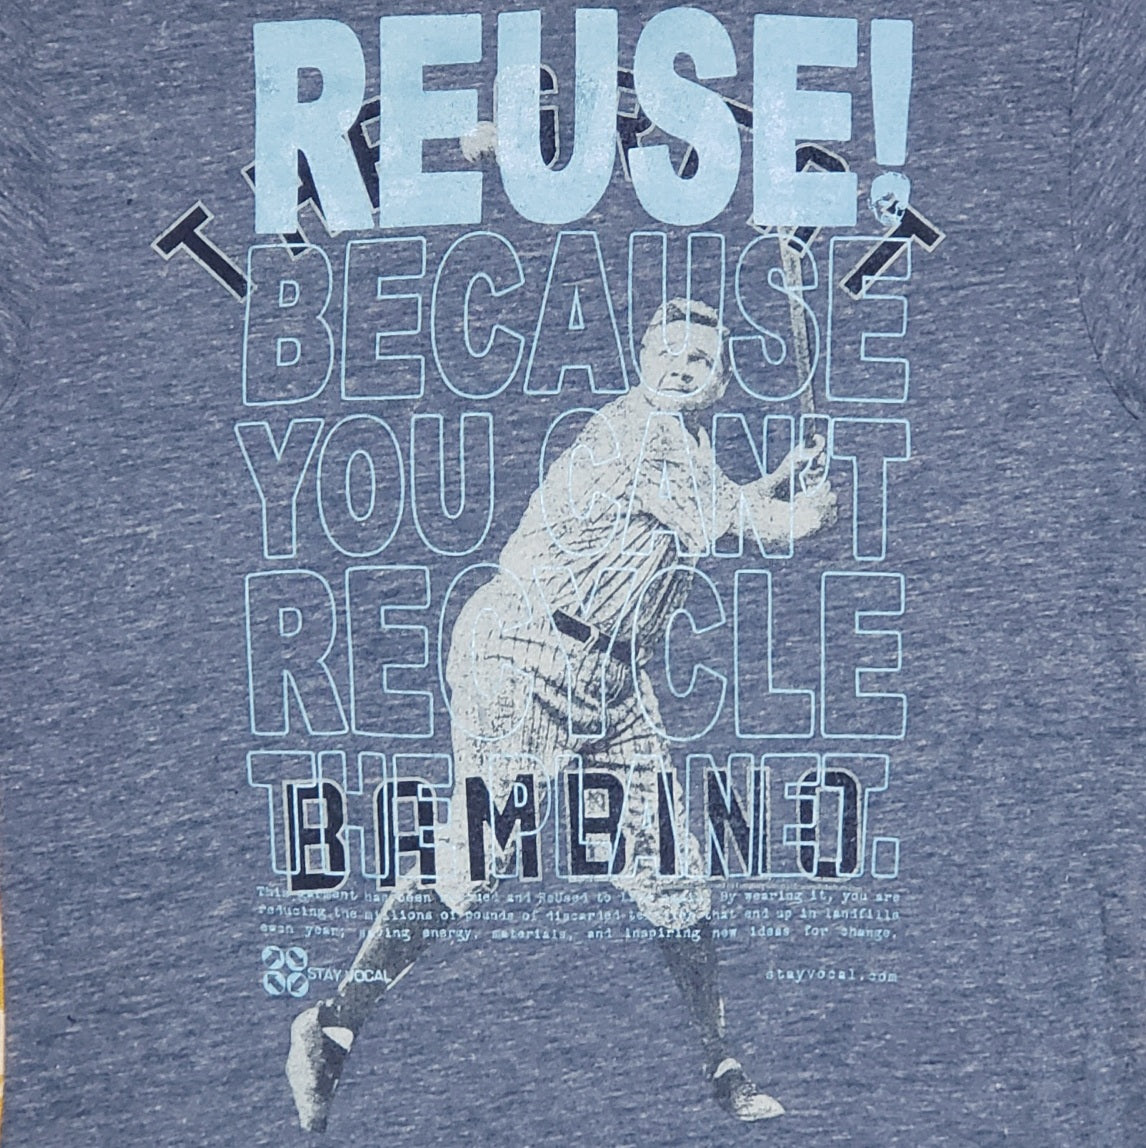 One of a Kind (Men's M) REUSE! Babe Ruth The Great Bambino T-Shirt